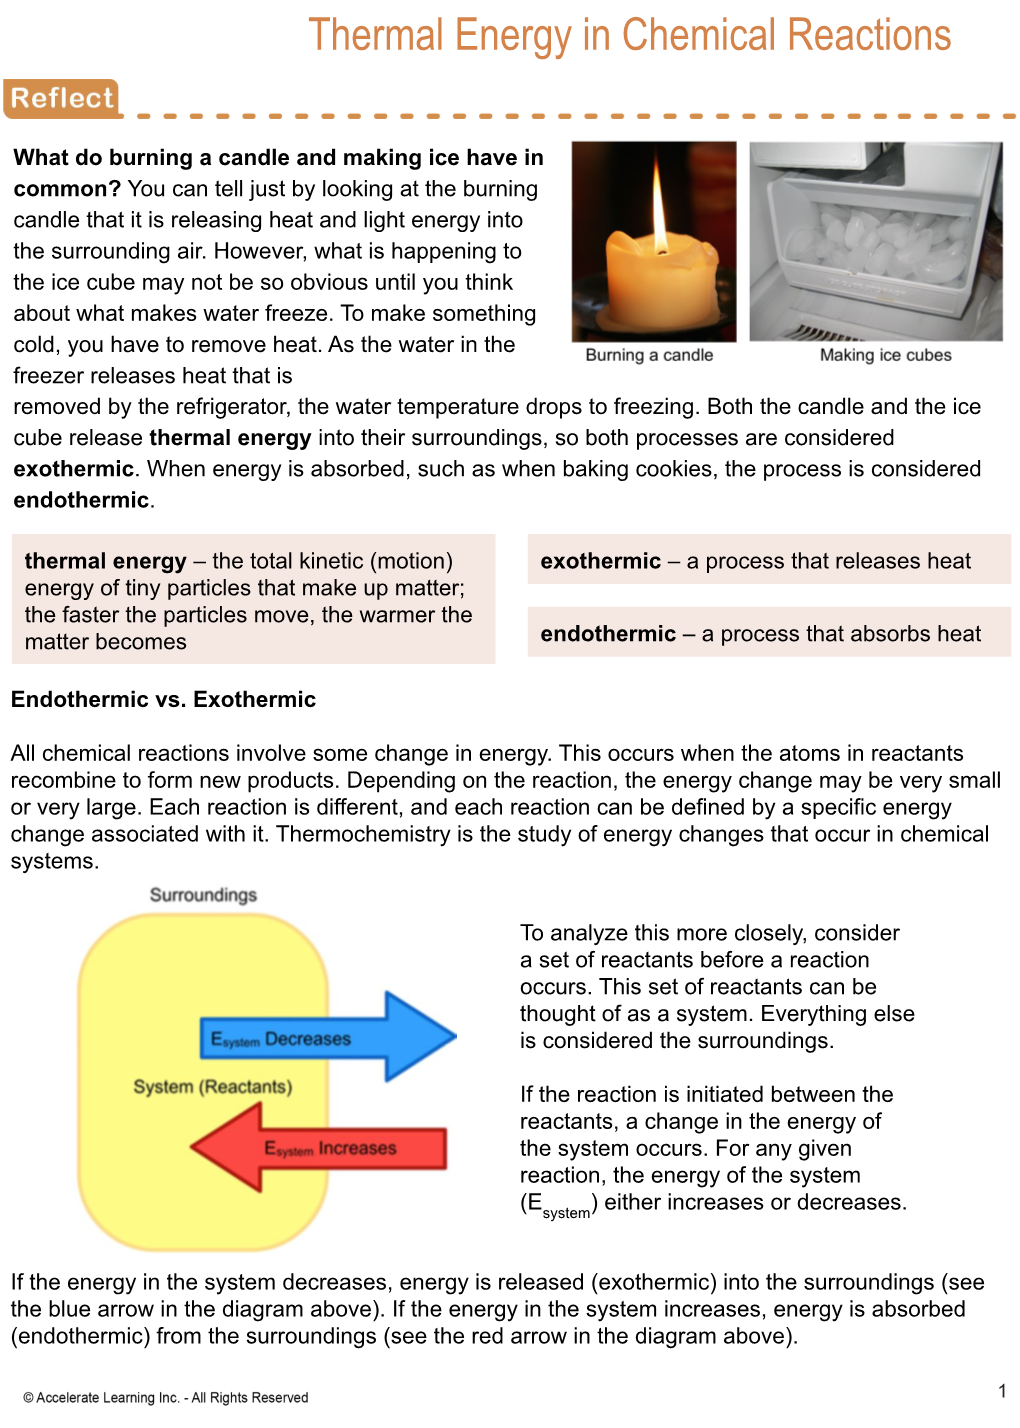 Thermal Energy in Chemical Reactions